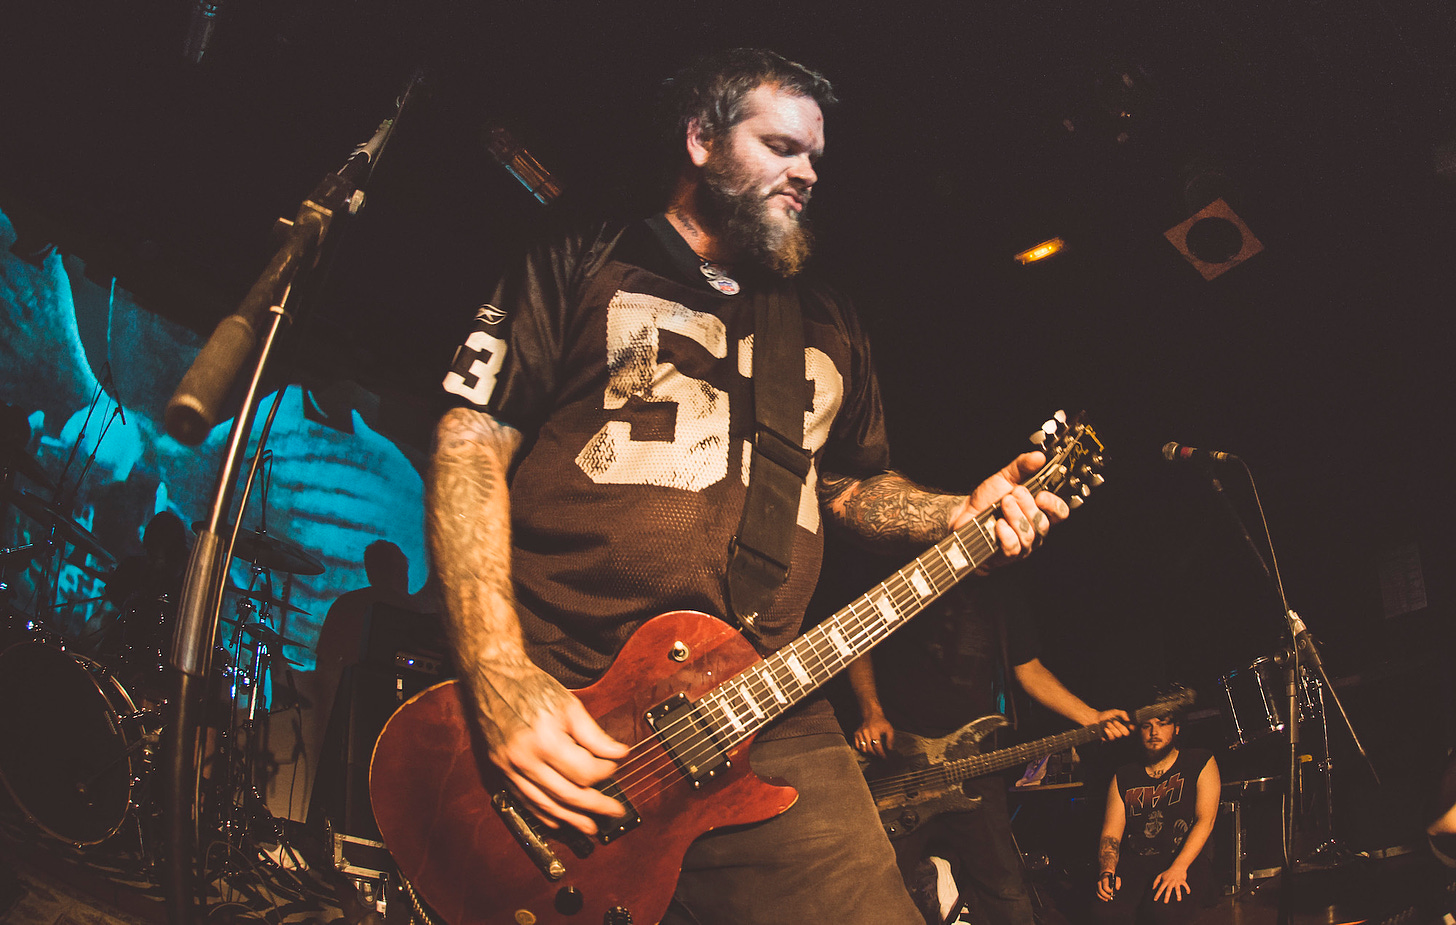 Neurosis singer Scott Kelly retires from music and admits abuse